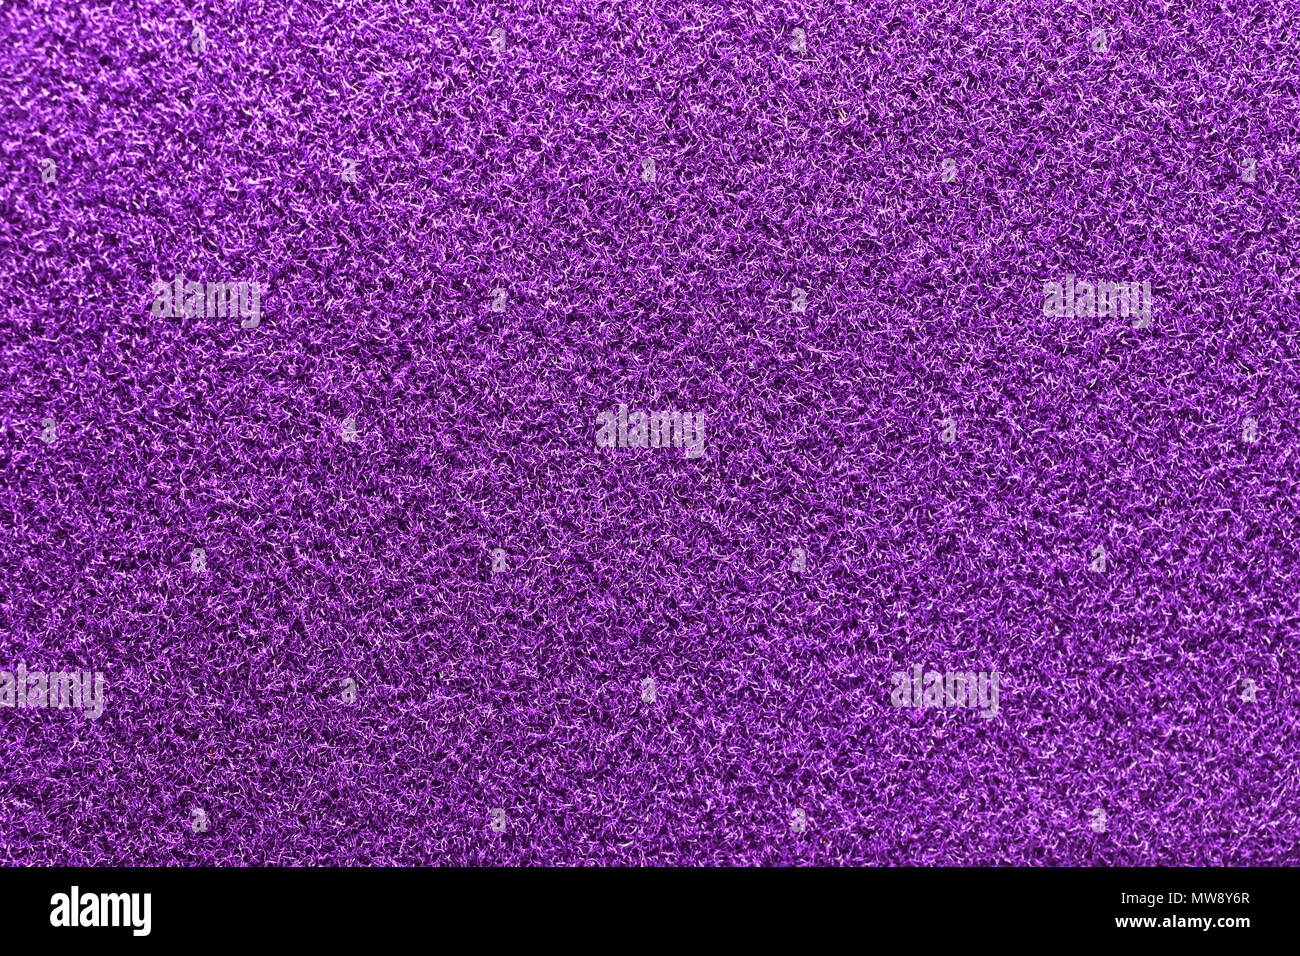 Lilac Fleecy Material Texture. Detailed Fibers Fluffy Surface Background. Stock Photo